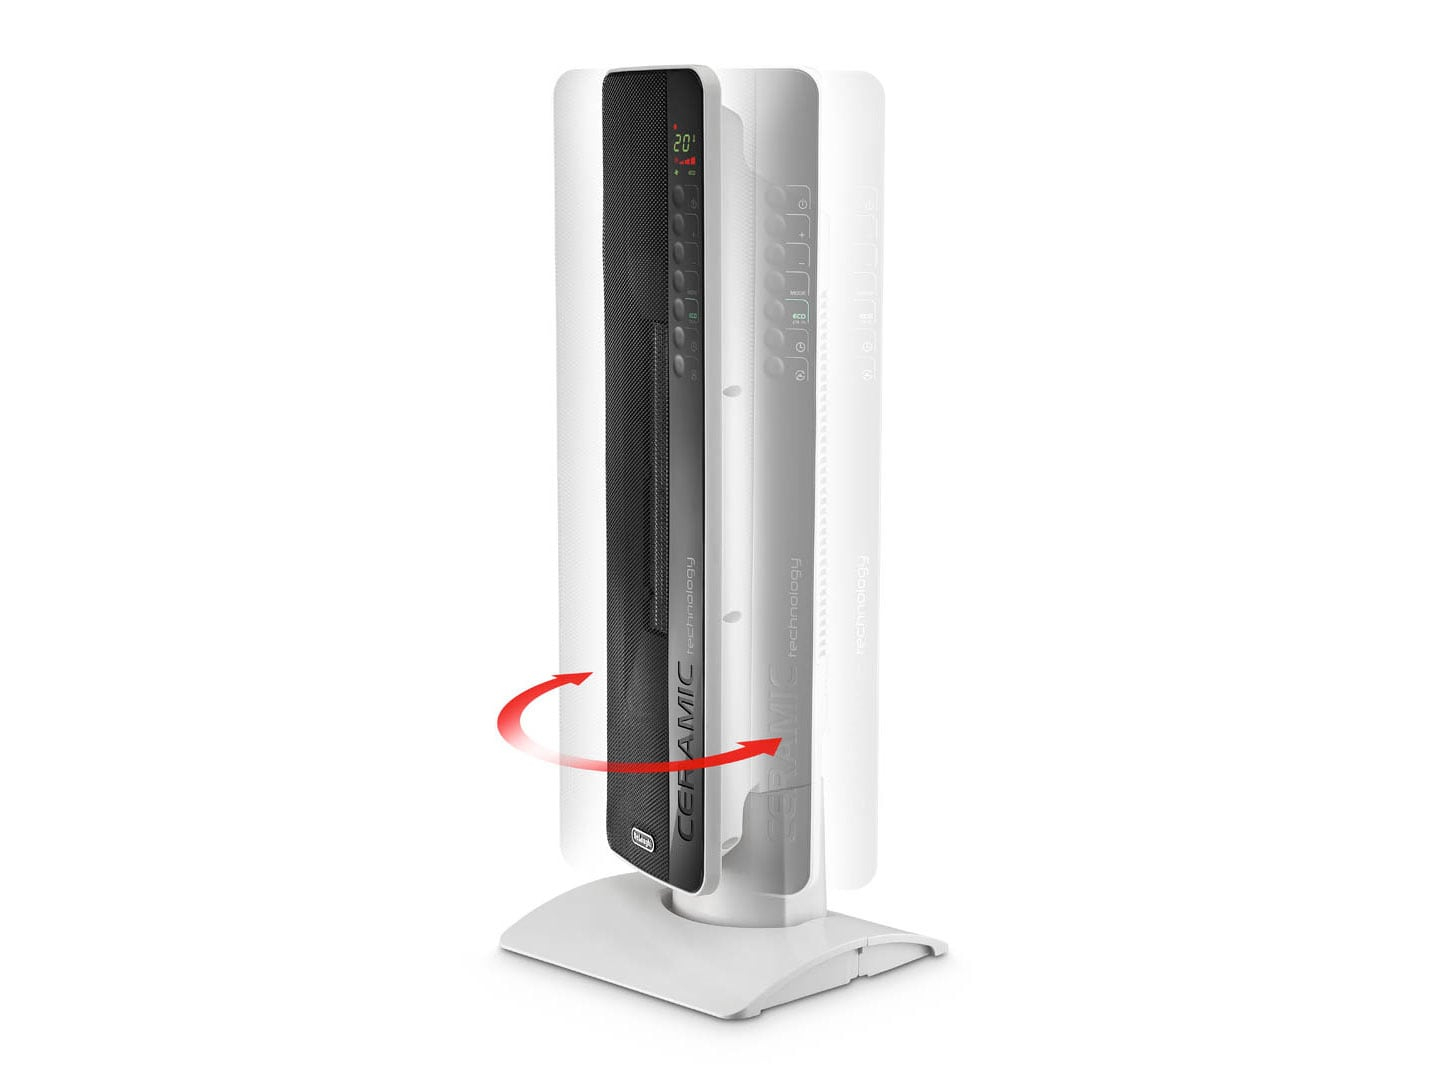 Tch8093er 2400w Digital Ceramic Tower Heater Delonghi New with regard to size 1440 X 1080